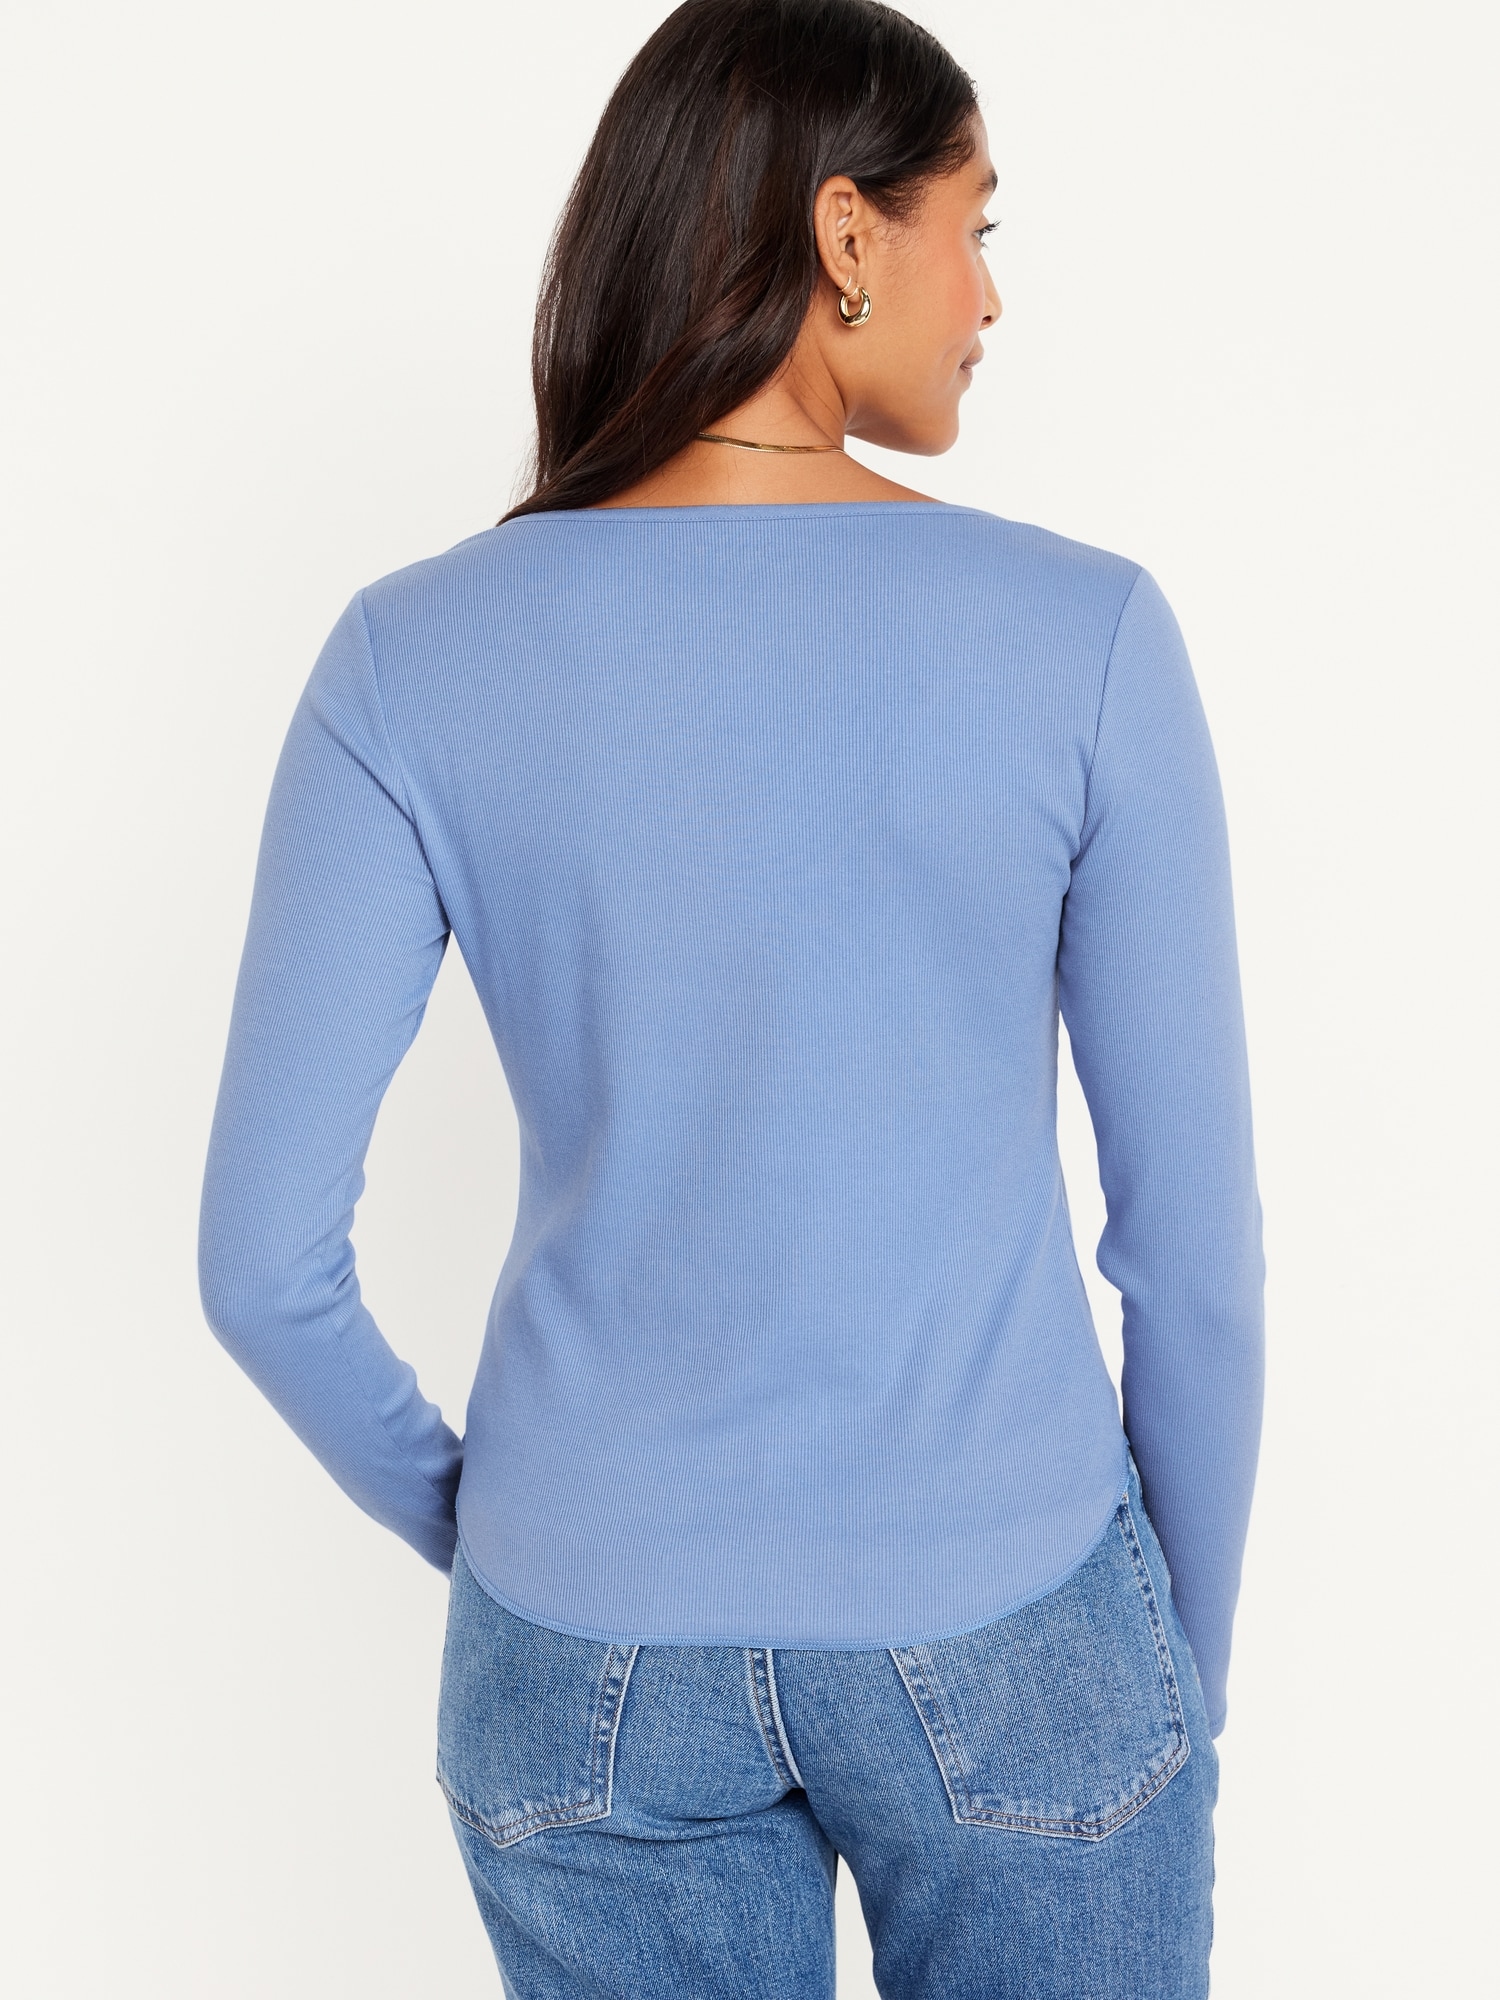 Fitted T-Shirt for Rib-Knit Long-Sleeve Navy Old Women |